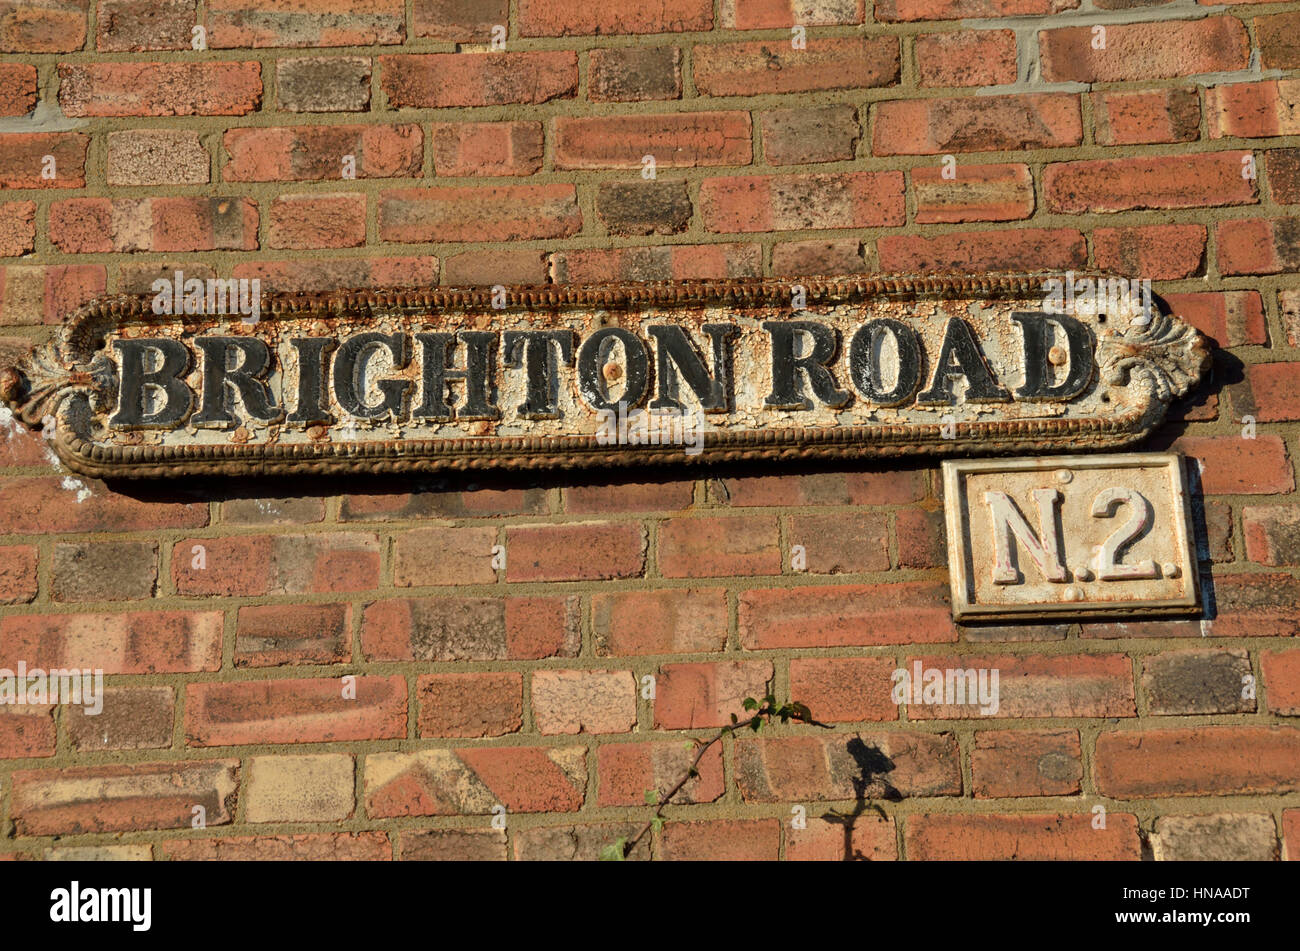 Old rusted Brighton Road street sign, Finchley N2, London, UK. Stock Photo